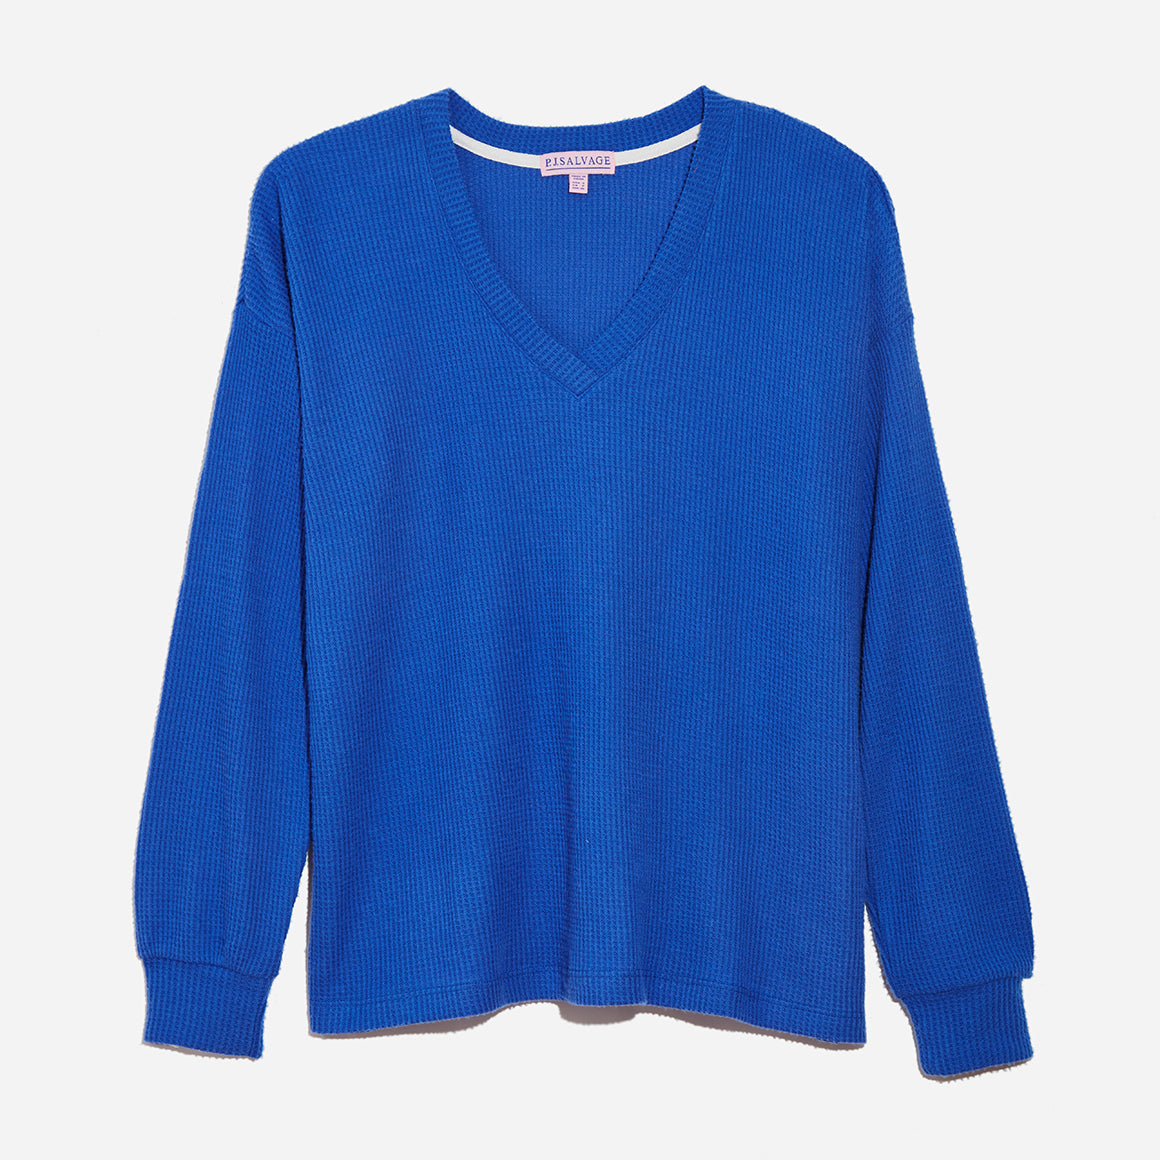 Top-down view of long sleeve waffle knit top in royal blue color. Shot against a grey background.